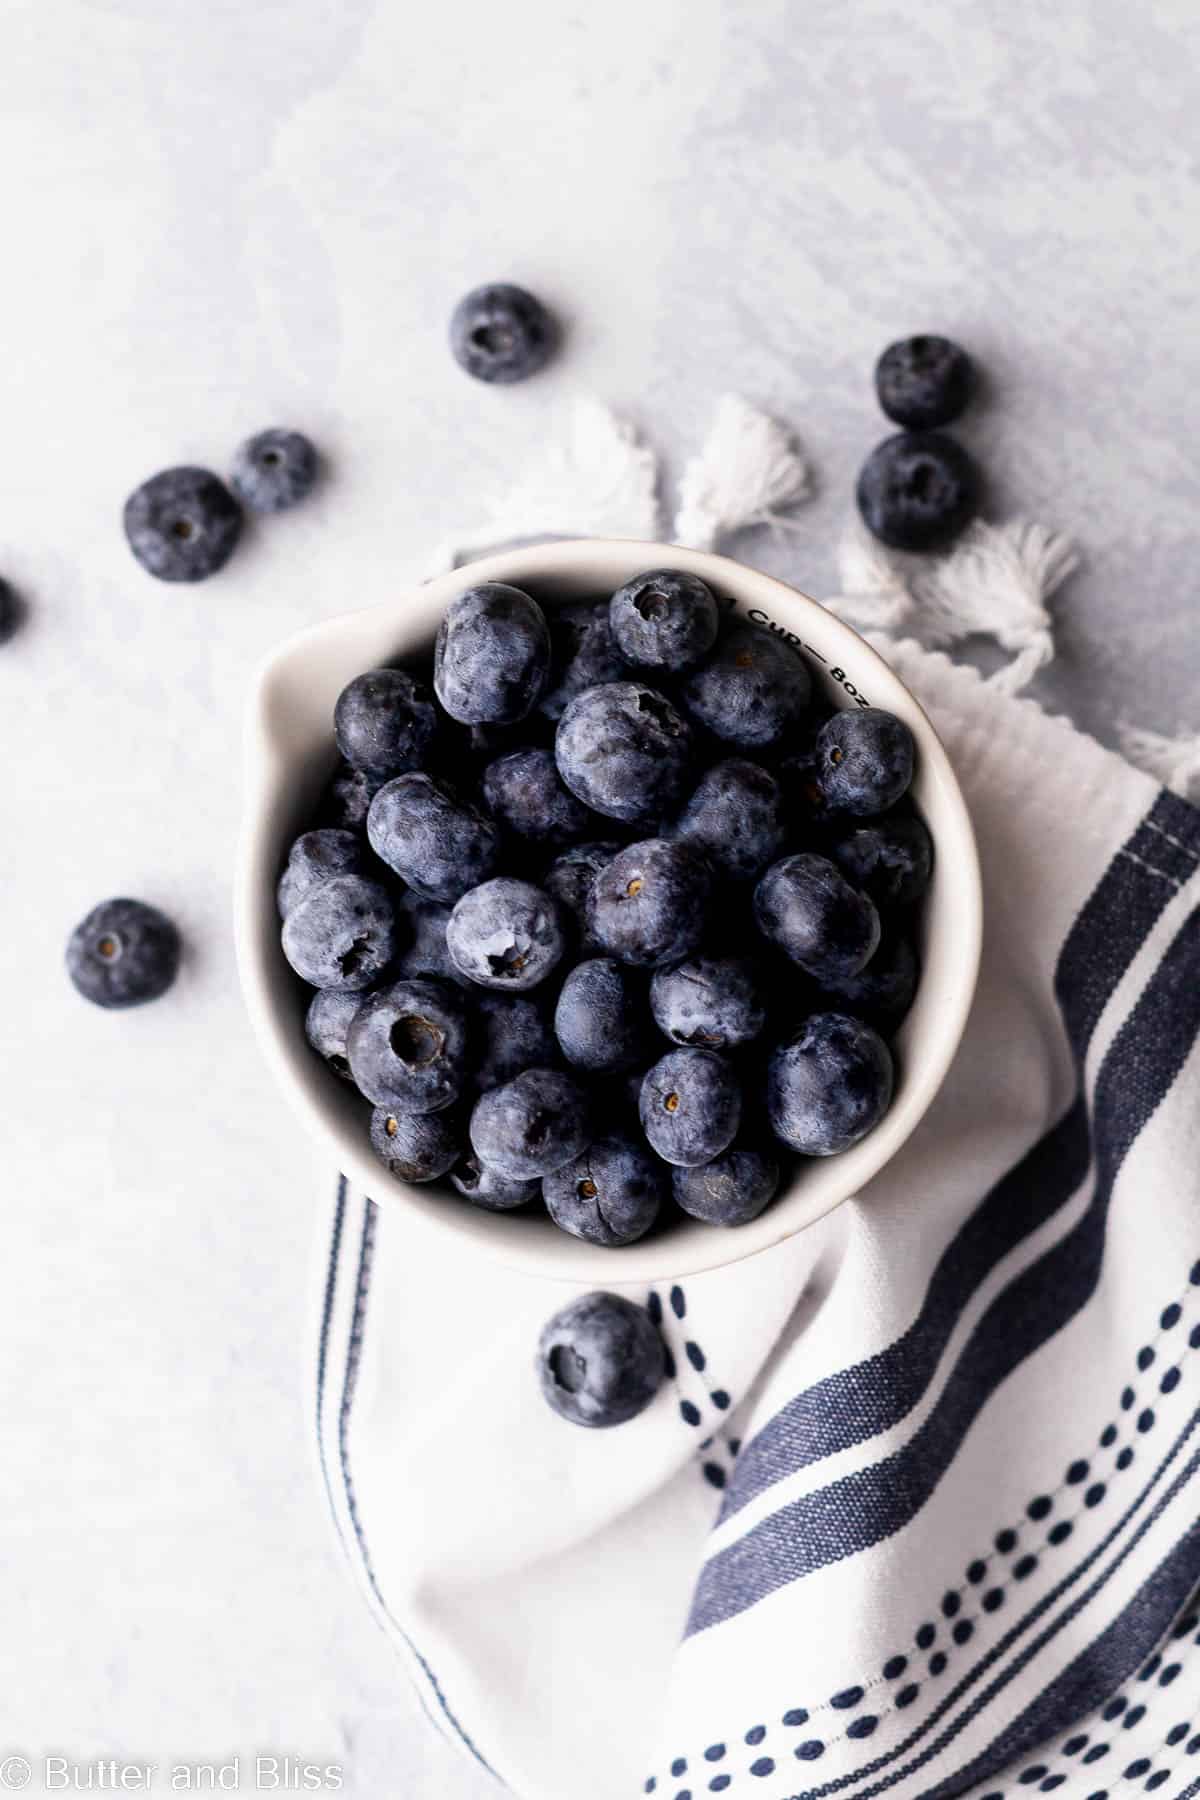 A bowl of fresh berries set on a blue table.